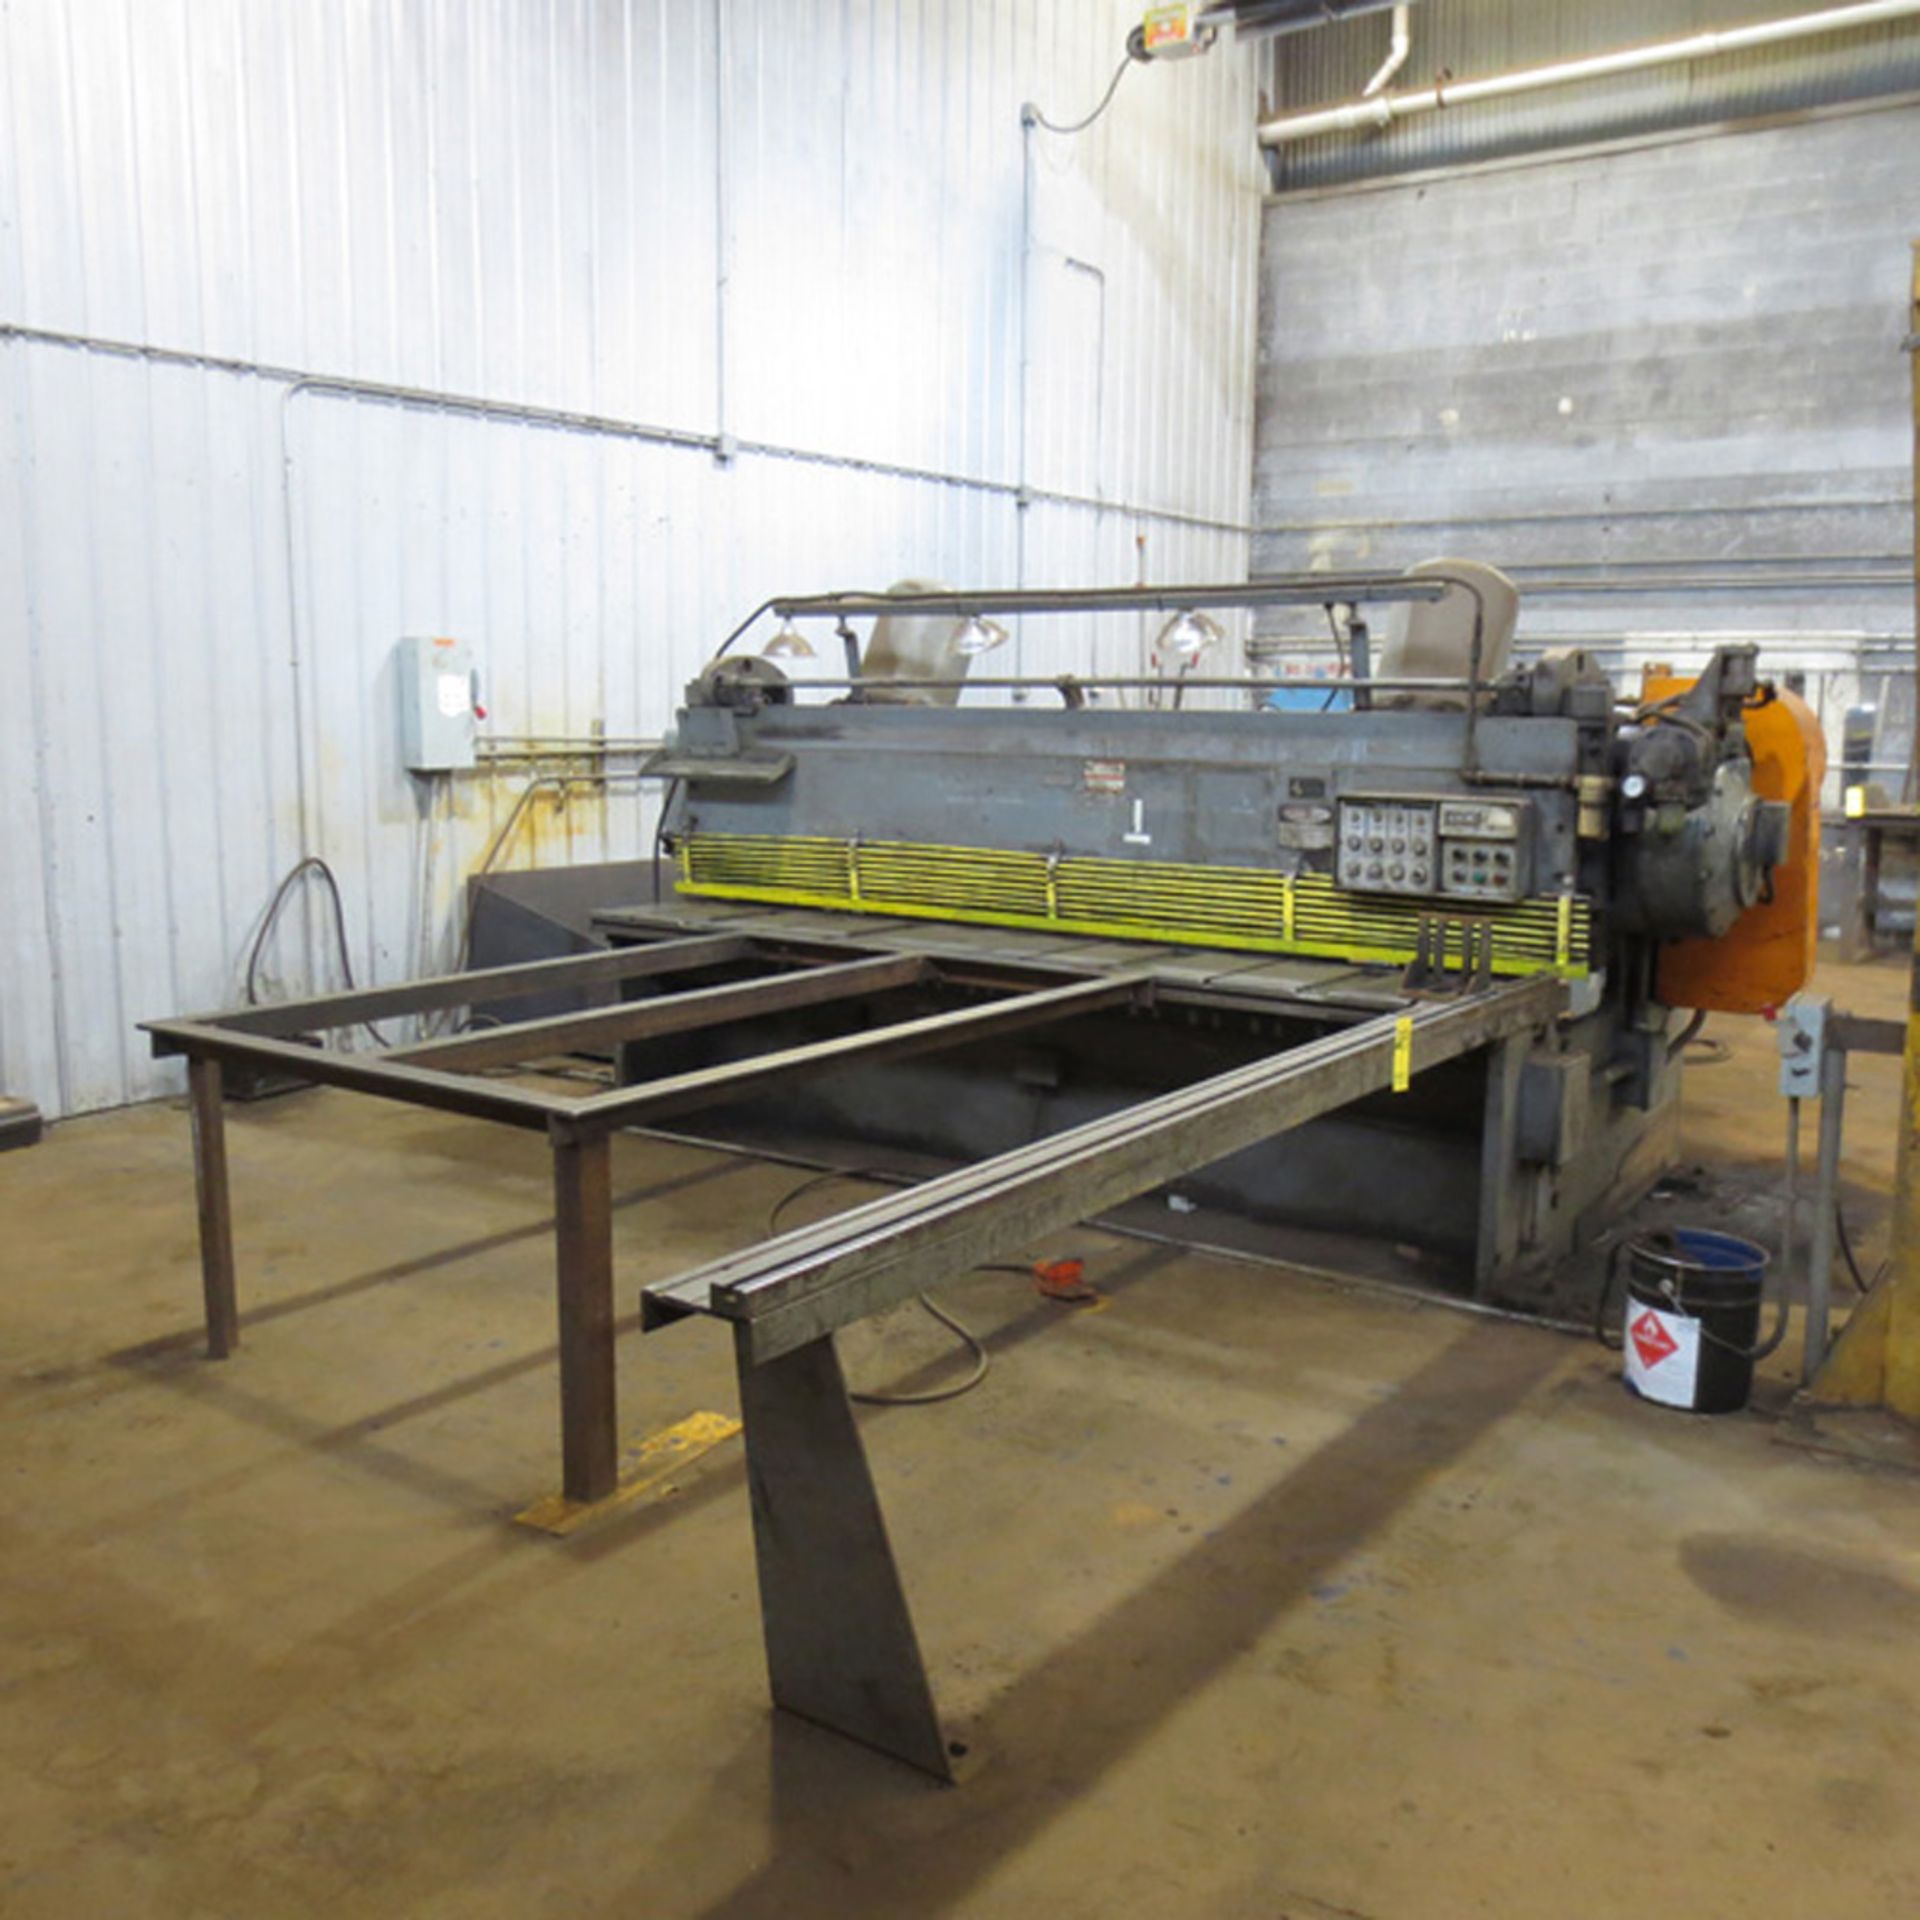 Cincinnati Power Shear, 1/4" x 10', Mdl: 1810, S/N: 38920 (7223P) (Located In Painesville, OH)